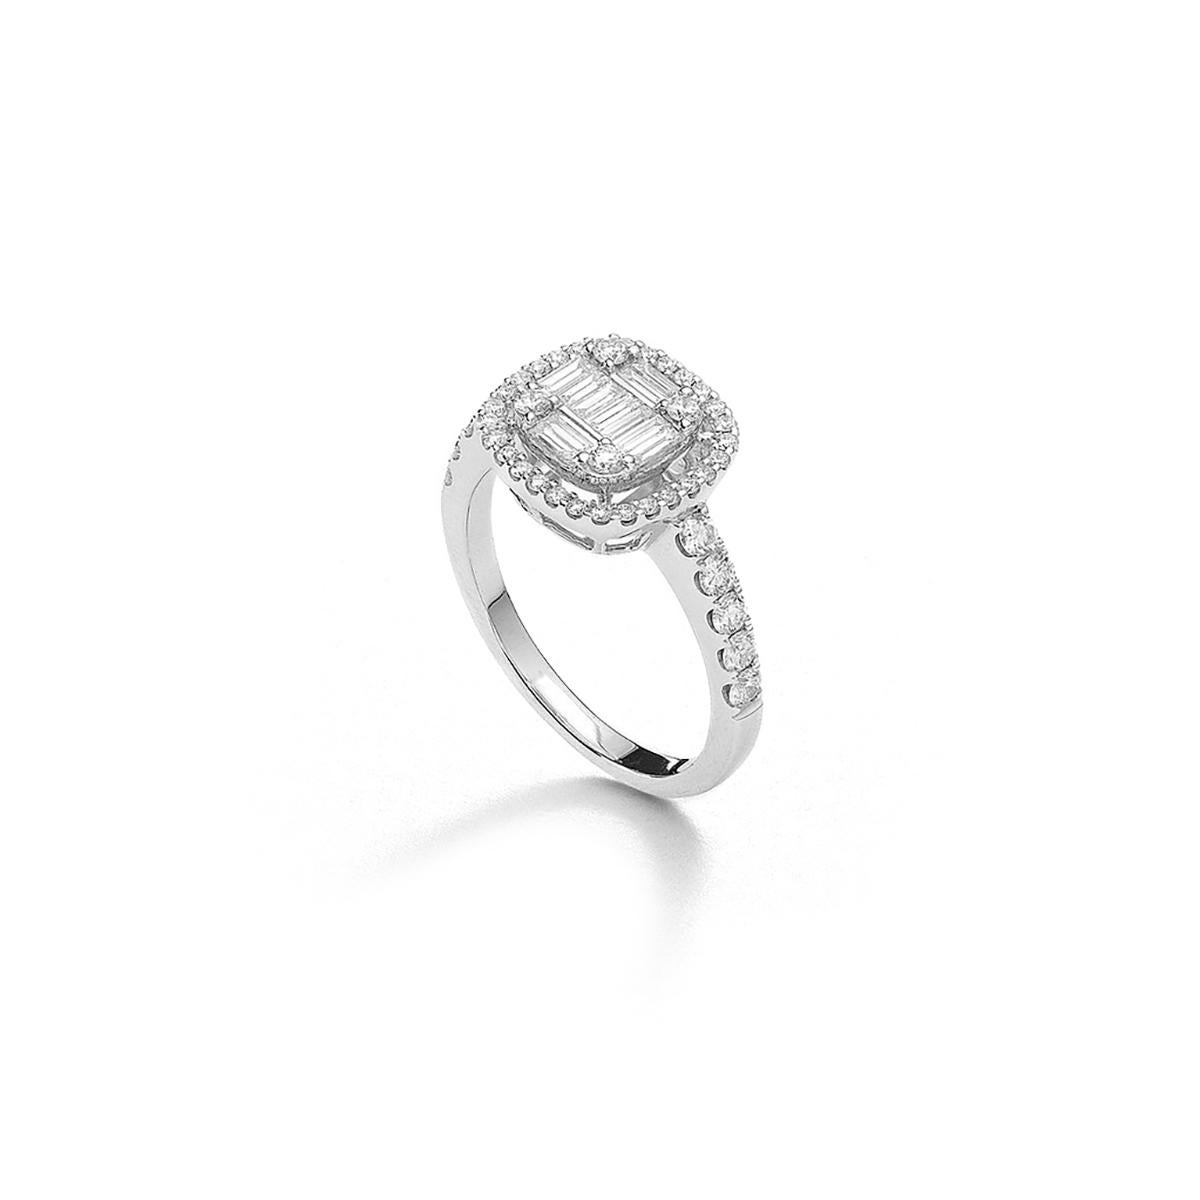 Ring in 18kt white gold set with 11 baguette cut diamonds 0.26 cts and 43 diamonds 0.59 cts Size 53